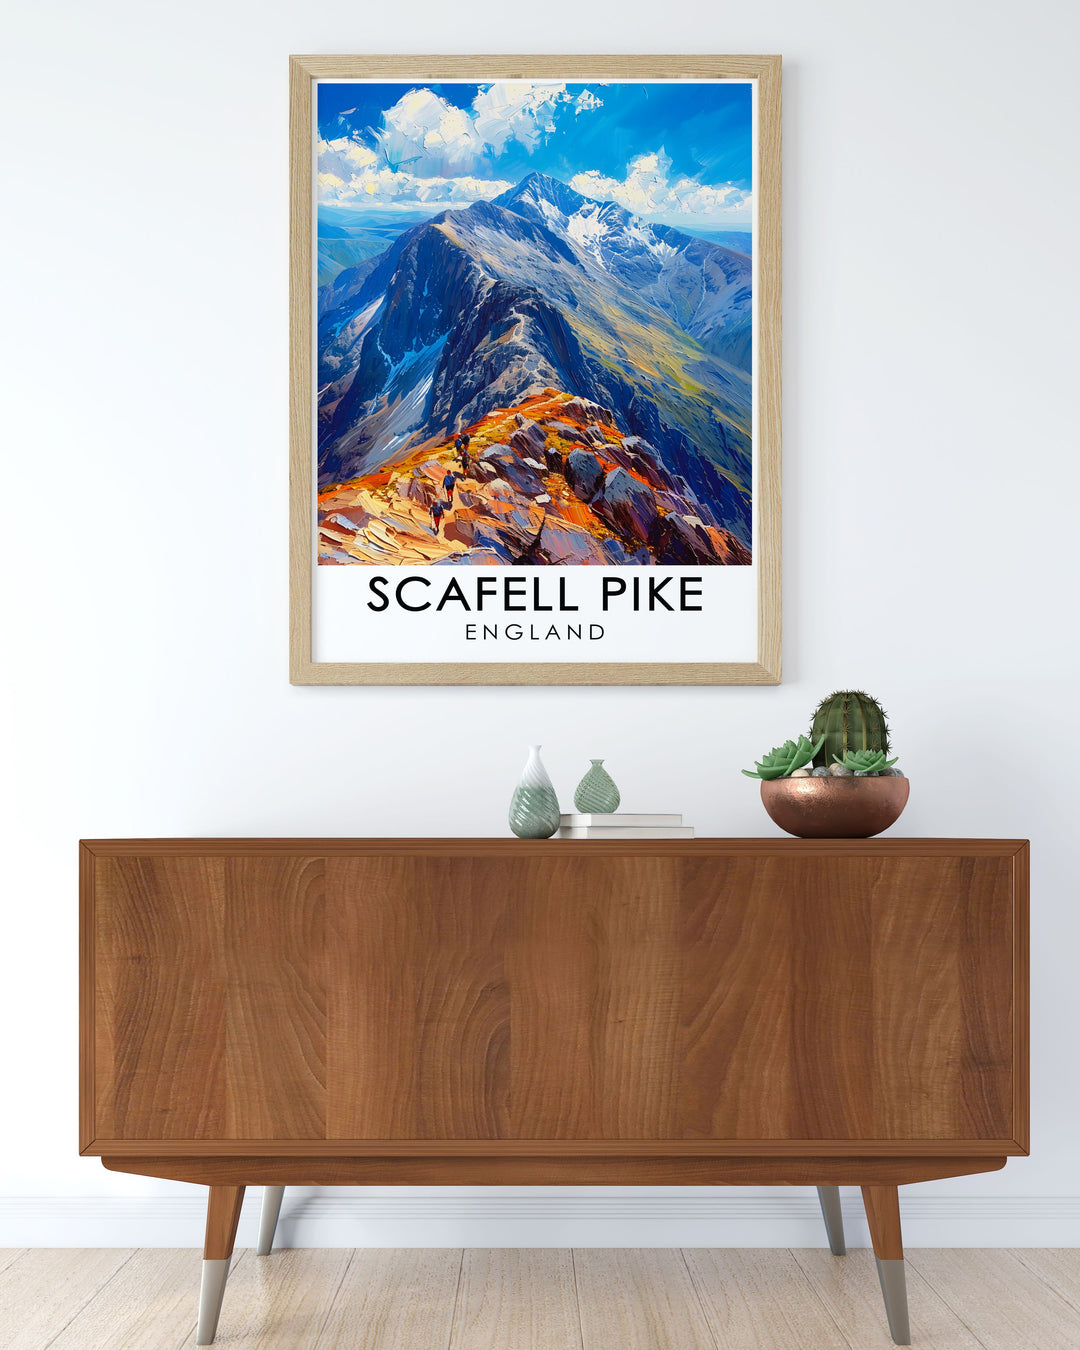 Beautifully detailed art print of Scafell Pike, capturing the essence of Englands highest mountain. Perfect for those who love hiking gifts and mountain wall art.